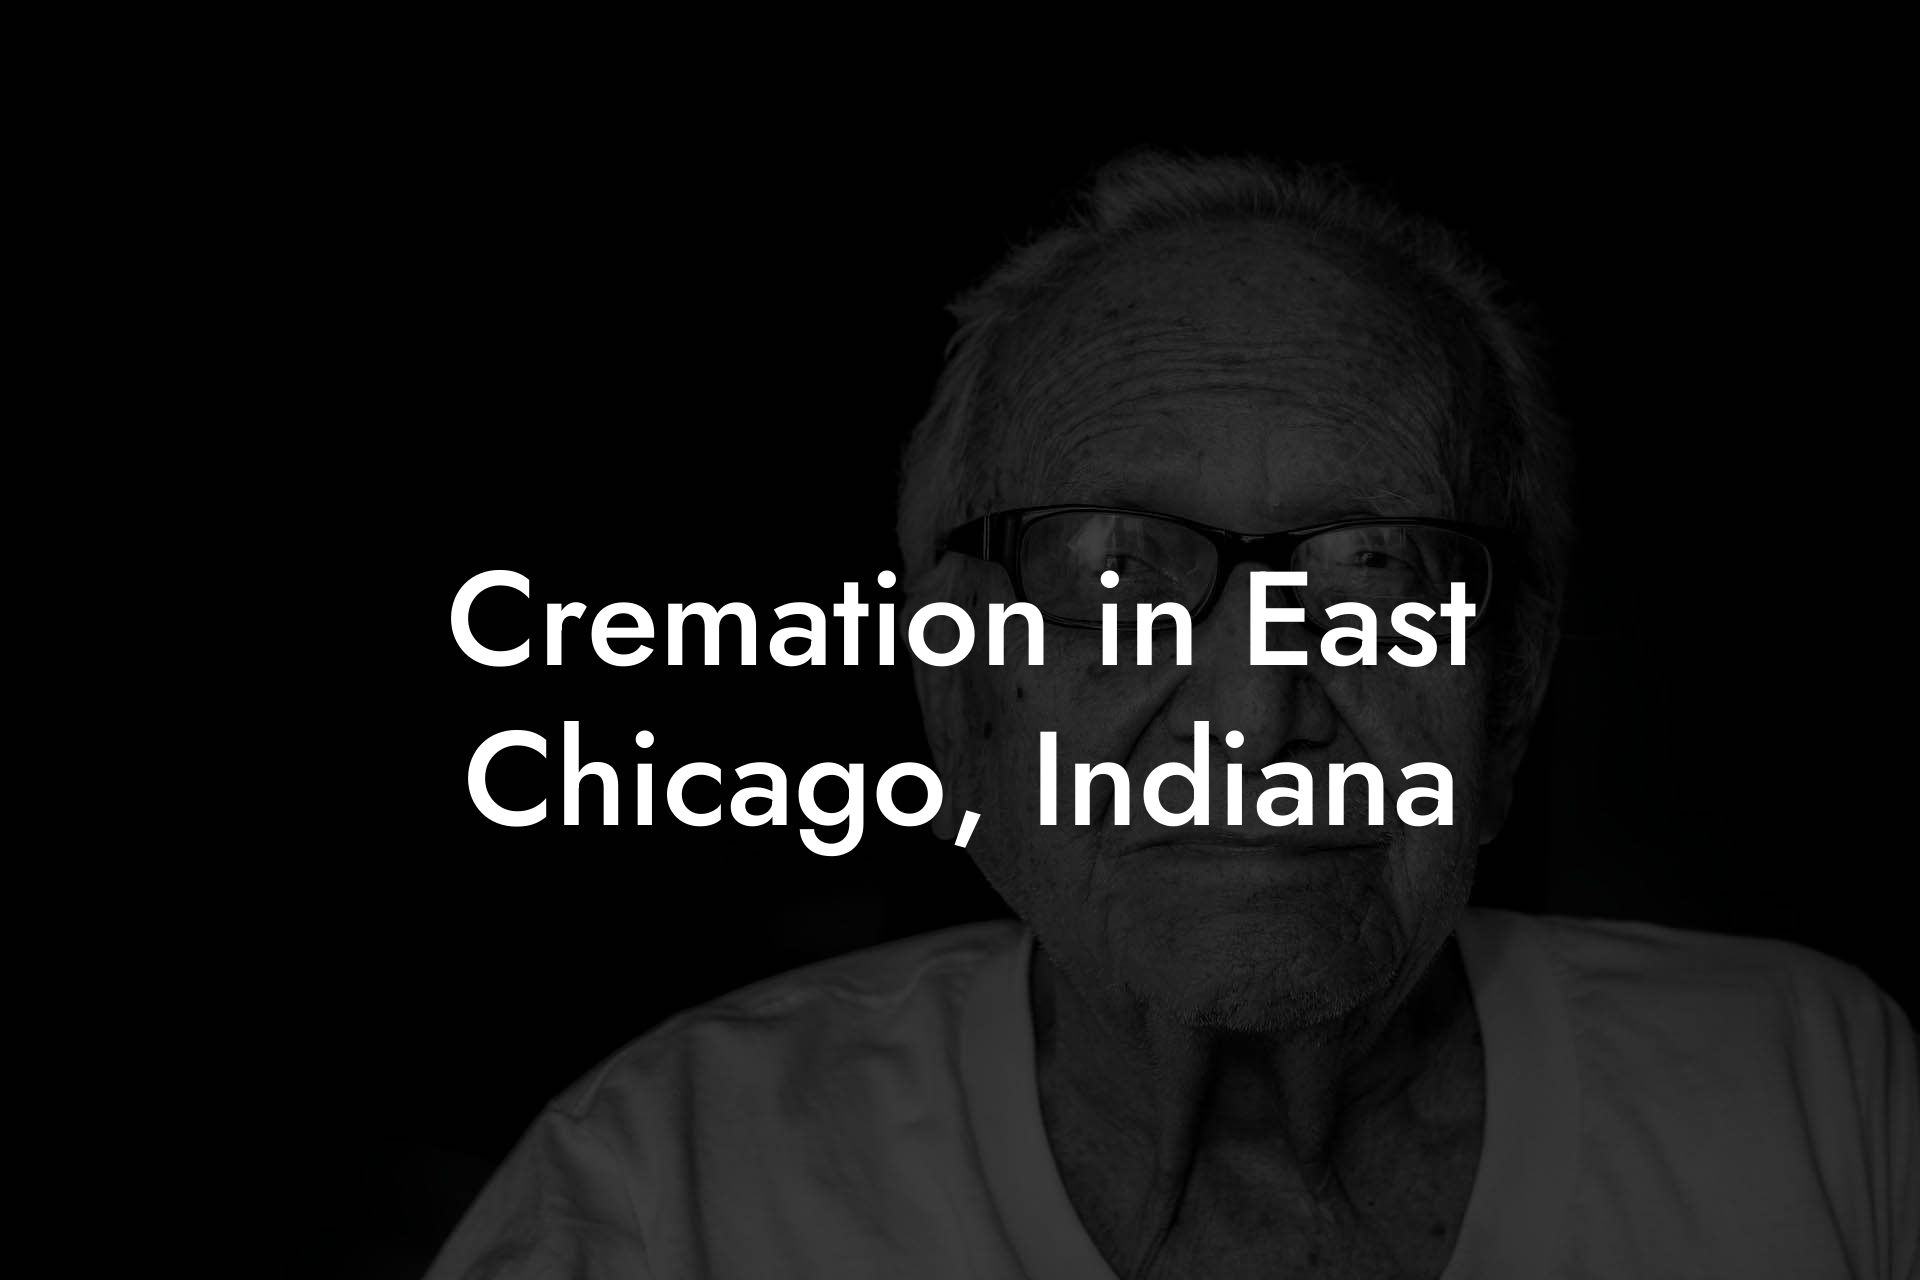 Cremation in East Chicago, Indiana